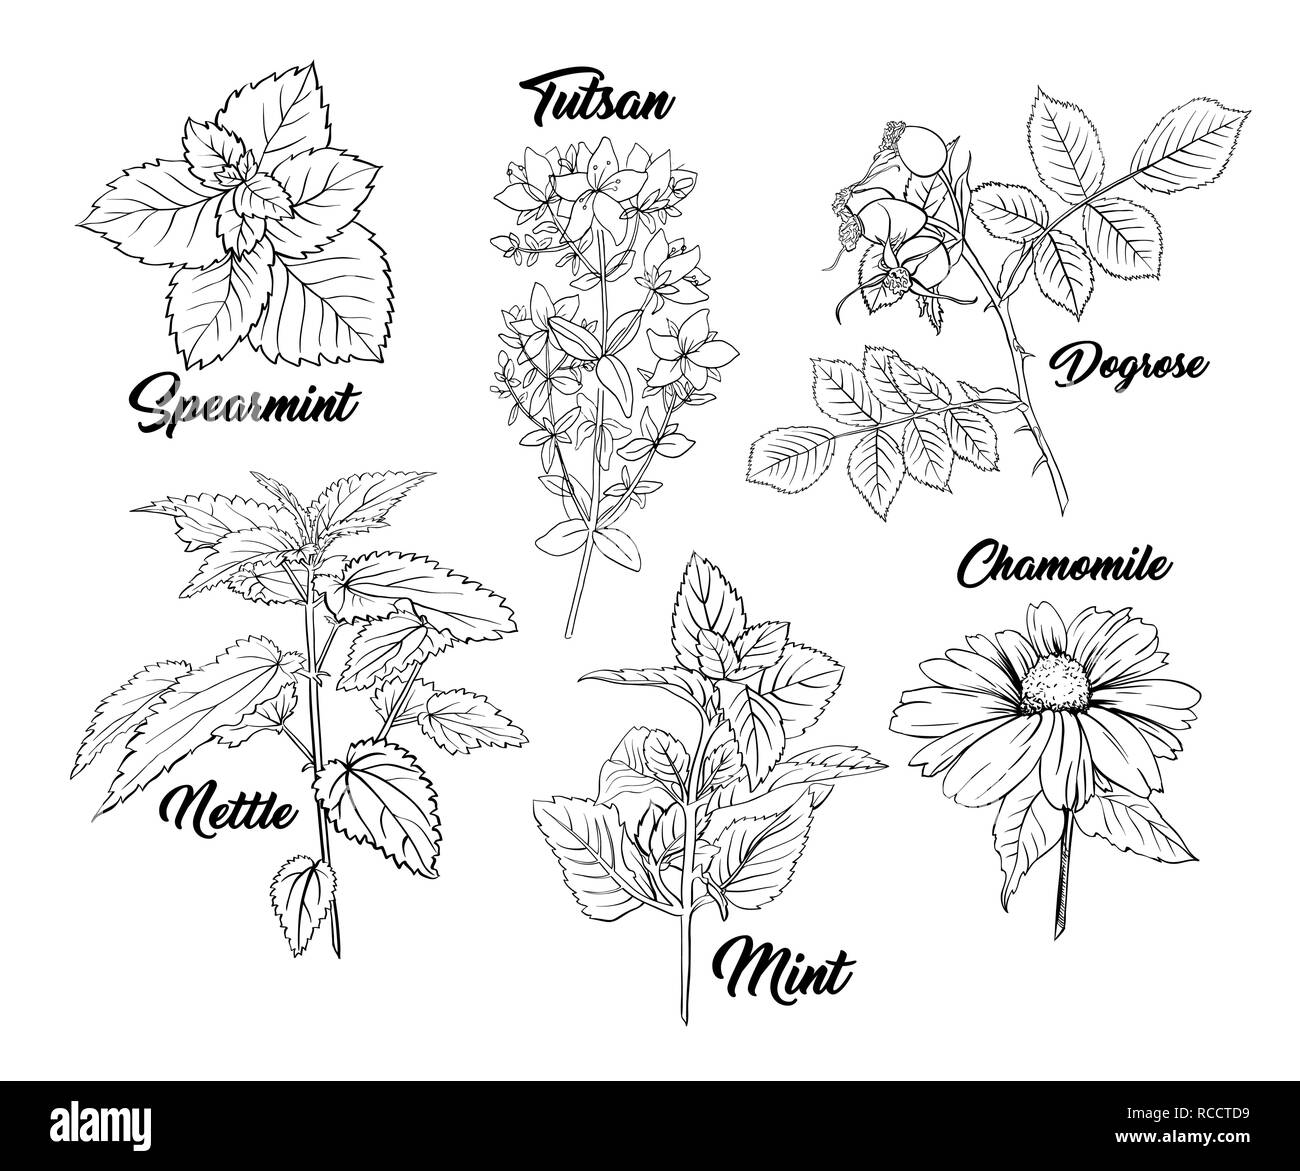 Tea Herbs Botany Plants Engraving Set. Sketch Isolated Hand Drawn Contour Illustration of Stinning Daisy or Chamomile Flower. Dogrose, Mint, Tutsan Herb. Herbal Medicine Nettle. Aromatherapy on White Stock Vector